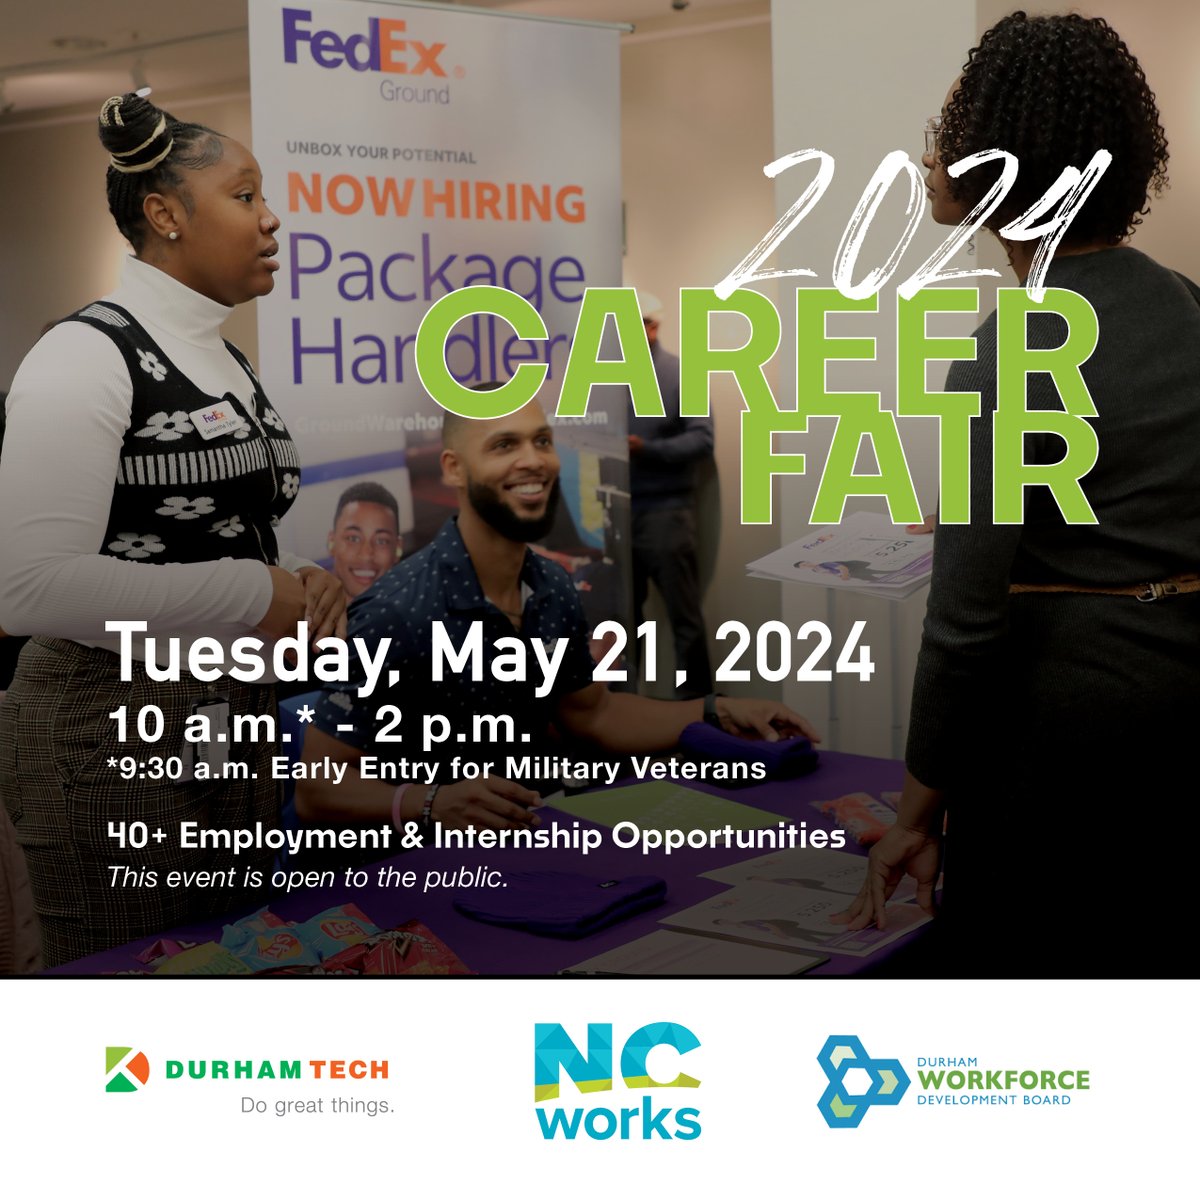 ⭐️ Save the date! ⭐️ Durham Tech Career Services and Durham NCWorks Career Center are partnering to host the Spring 2024 Career Fair on Tuesday, May 21.

There will be more than 40 employers hiring in all fields. You don't want to miss it! #DoGreatThings